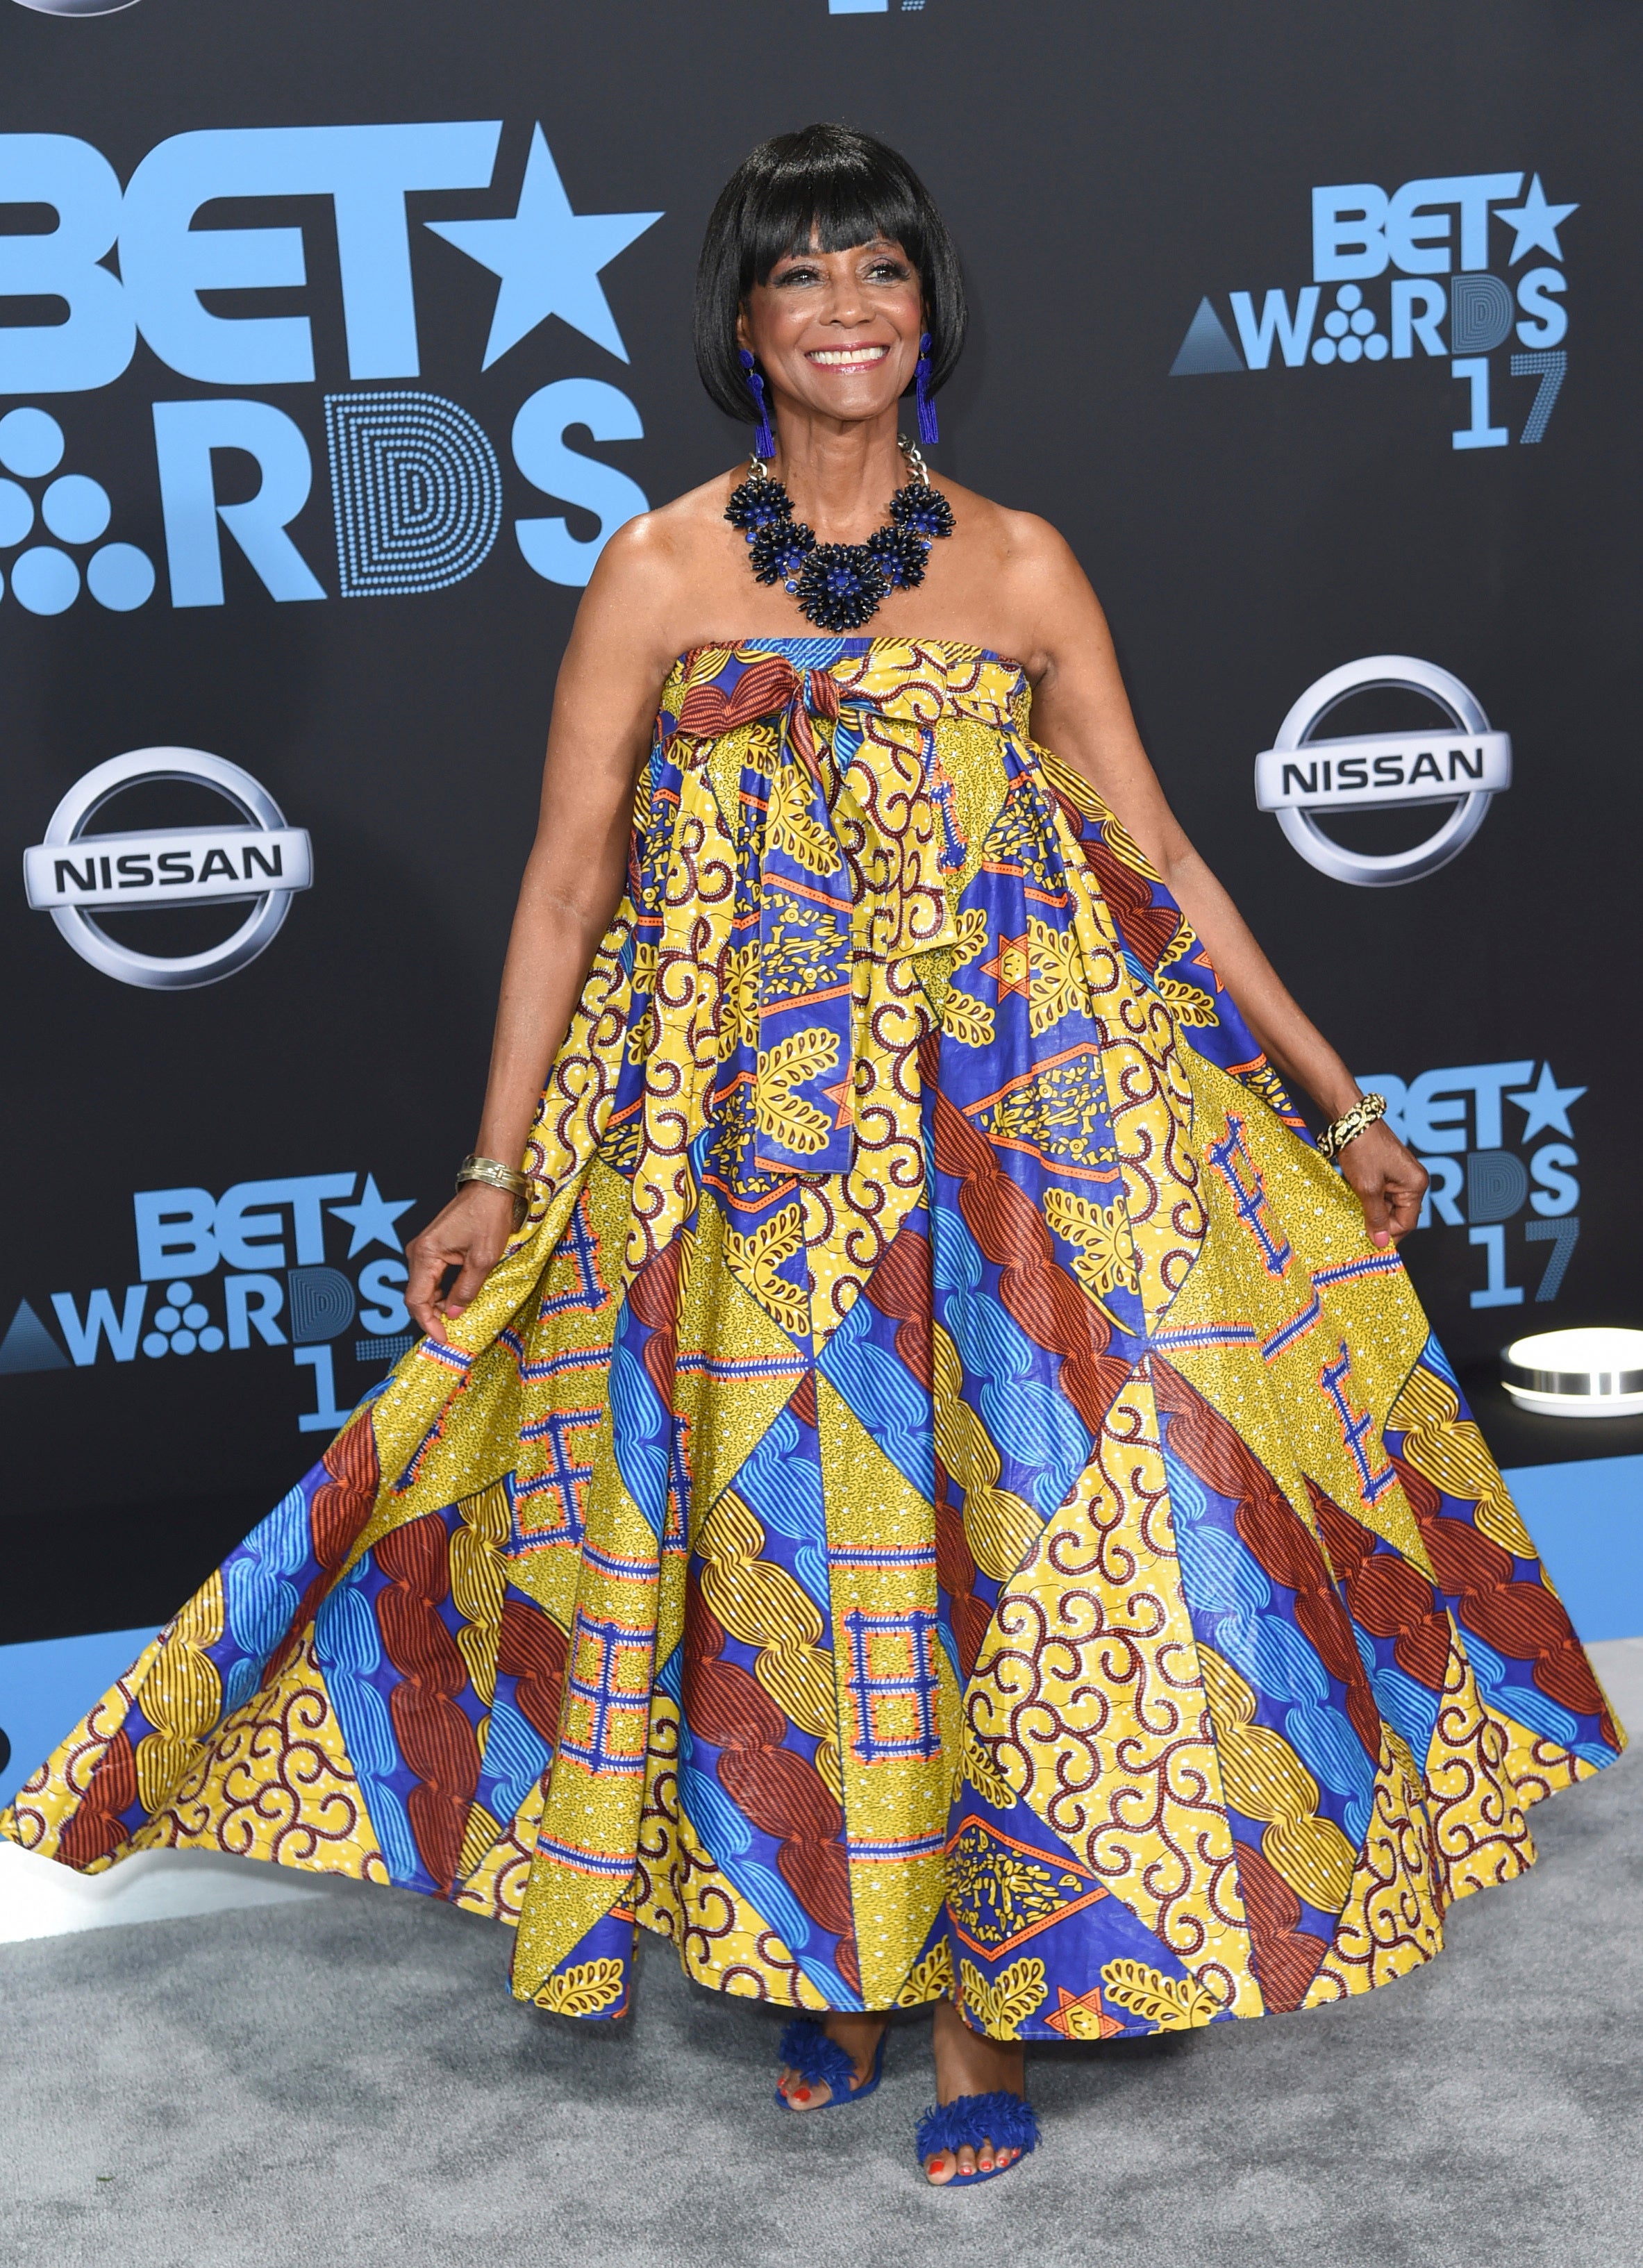 The 2017 BET Award Red Carpet Moments That Gave Us Life!